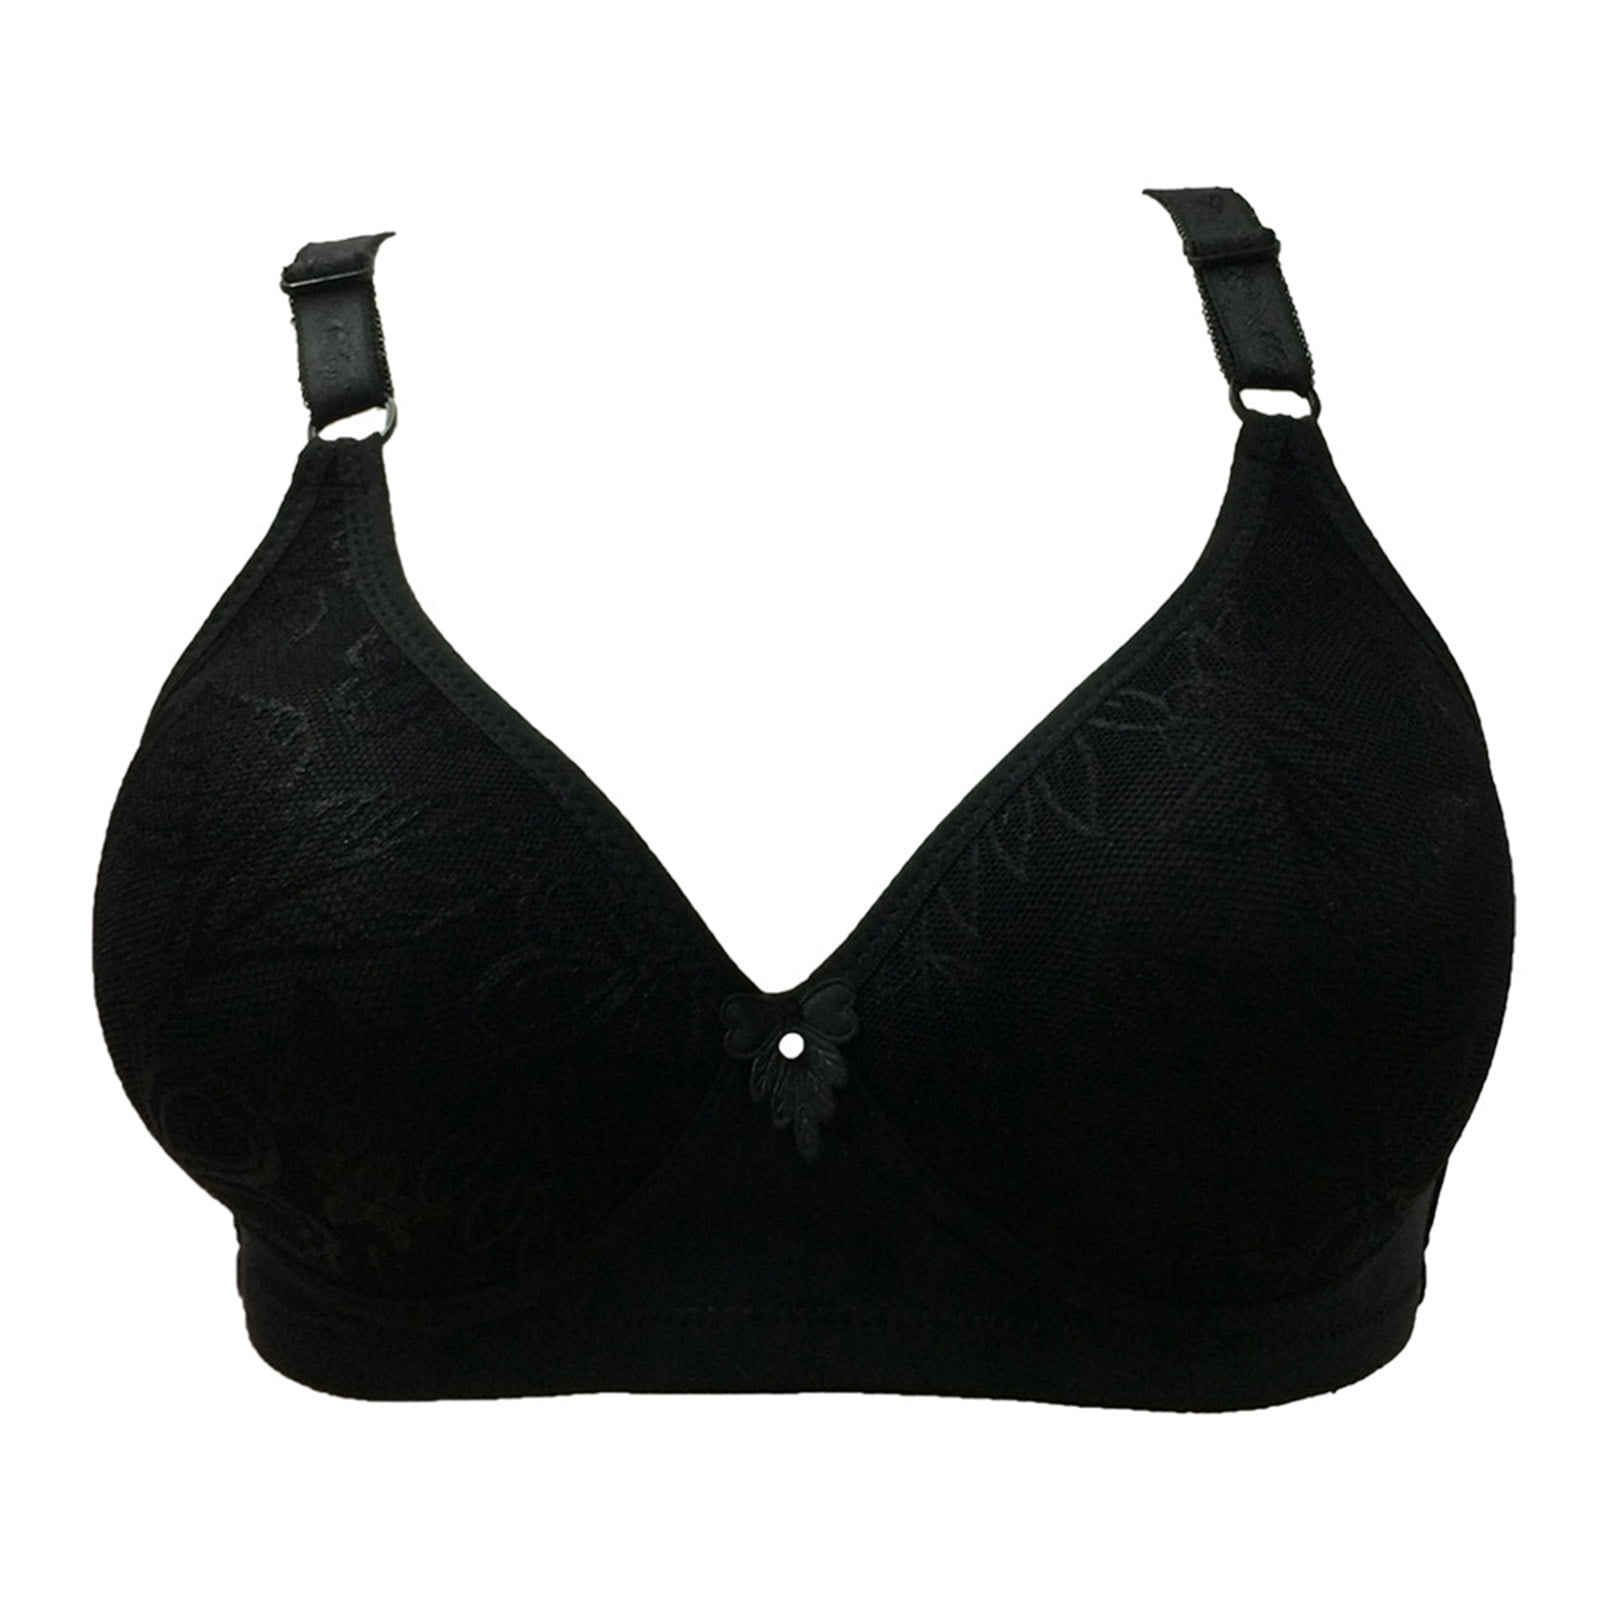 RYRJJ Wireless Push Up Bra for Women Floral Lace Soft Full Cup